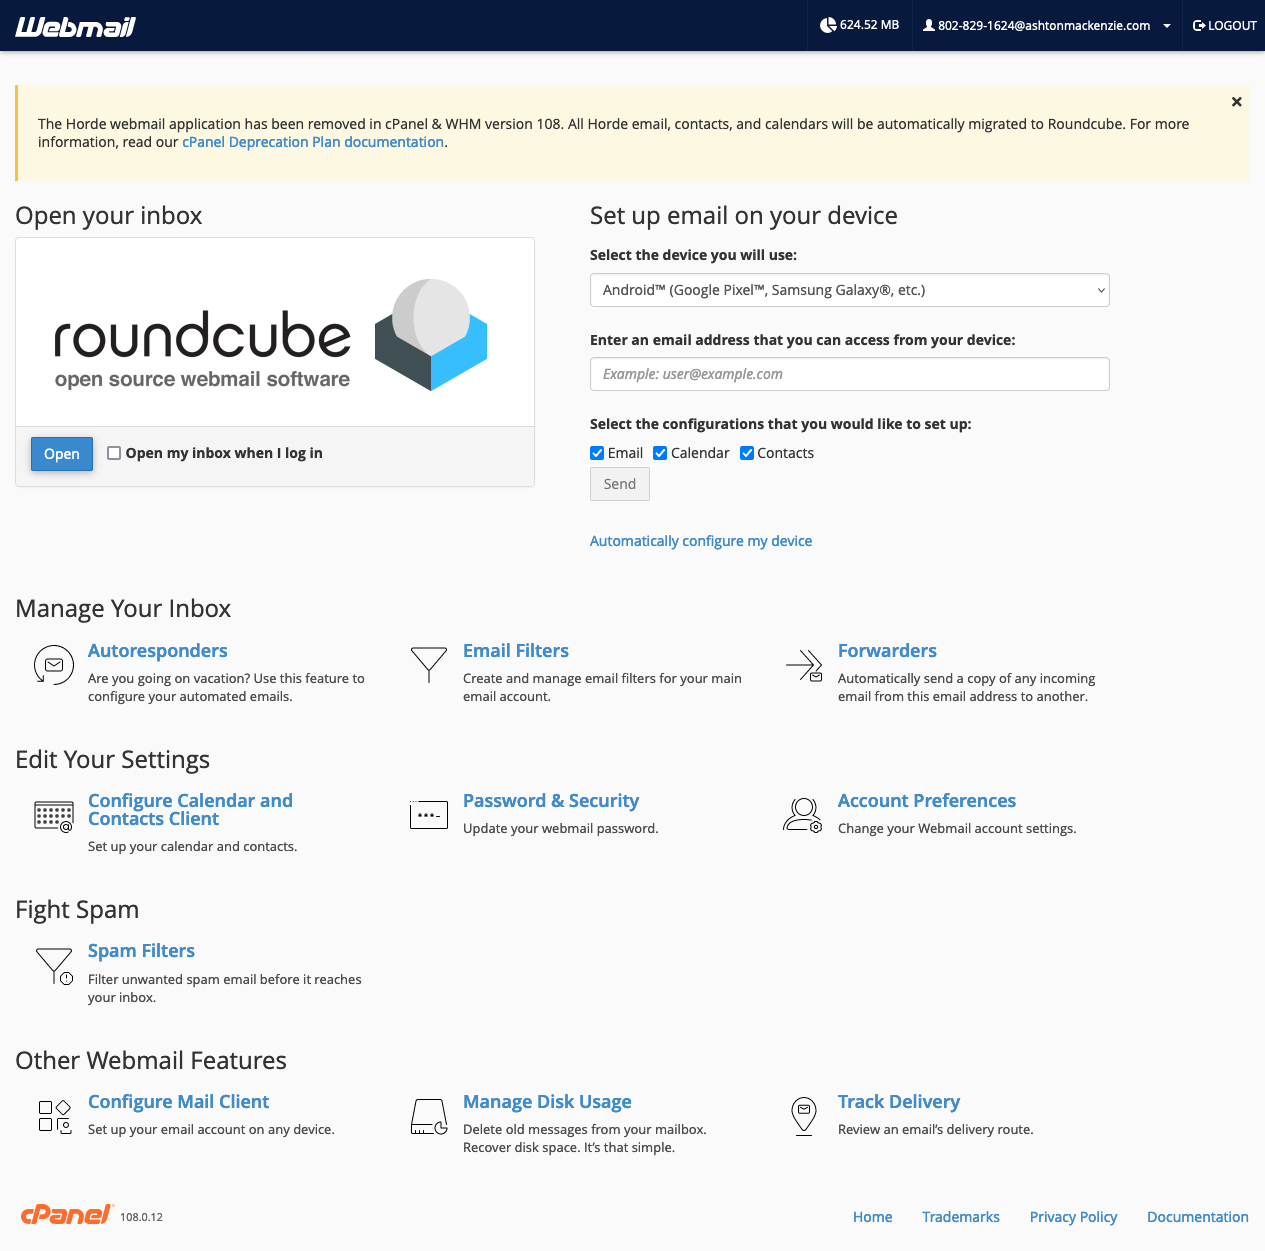 A screenshot of the roundcube email console